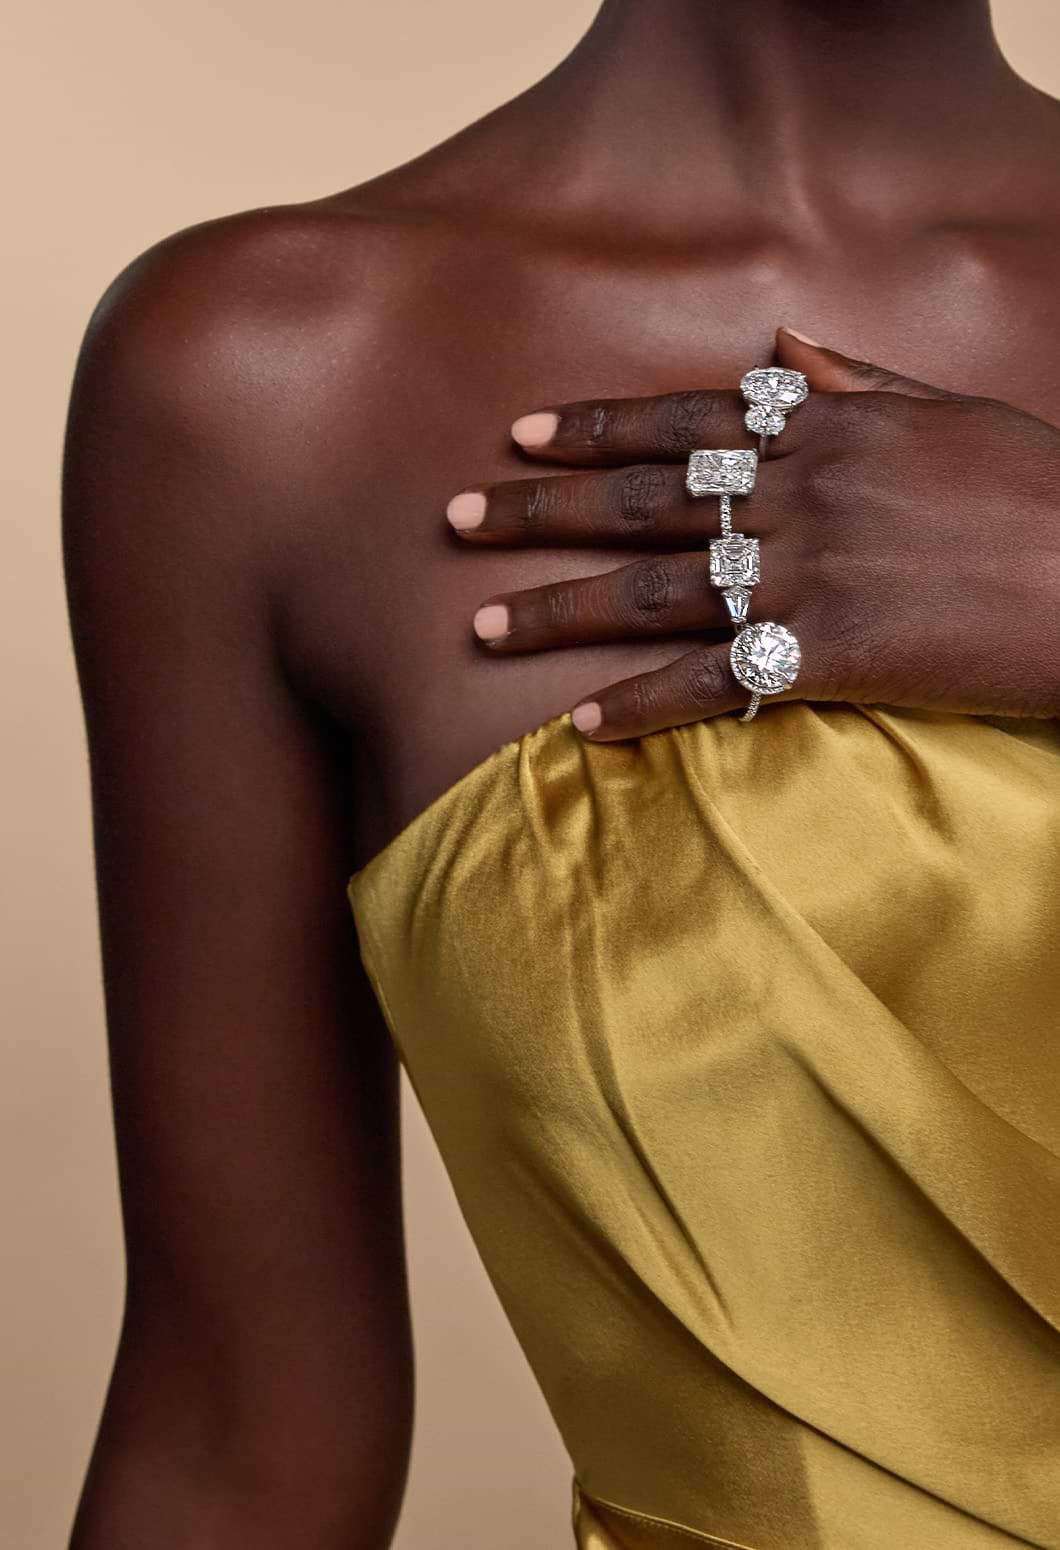 A female model's hand gently placed on her chest featuring four diamond engagement rings